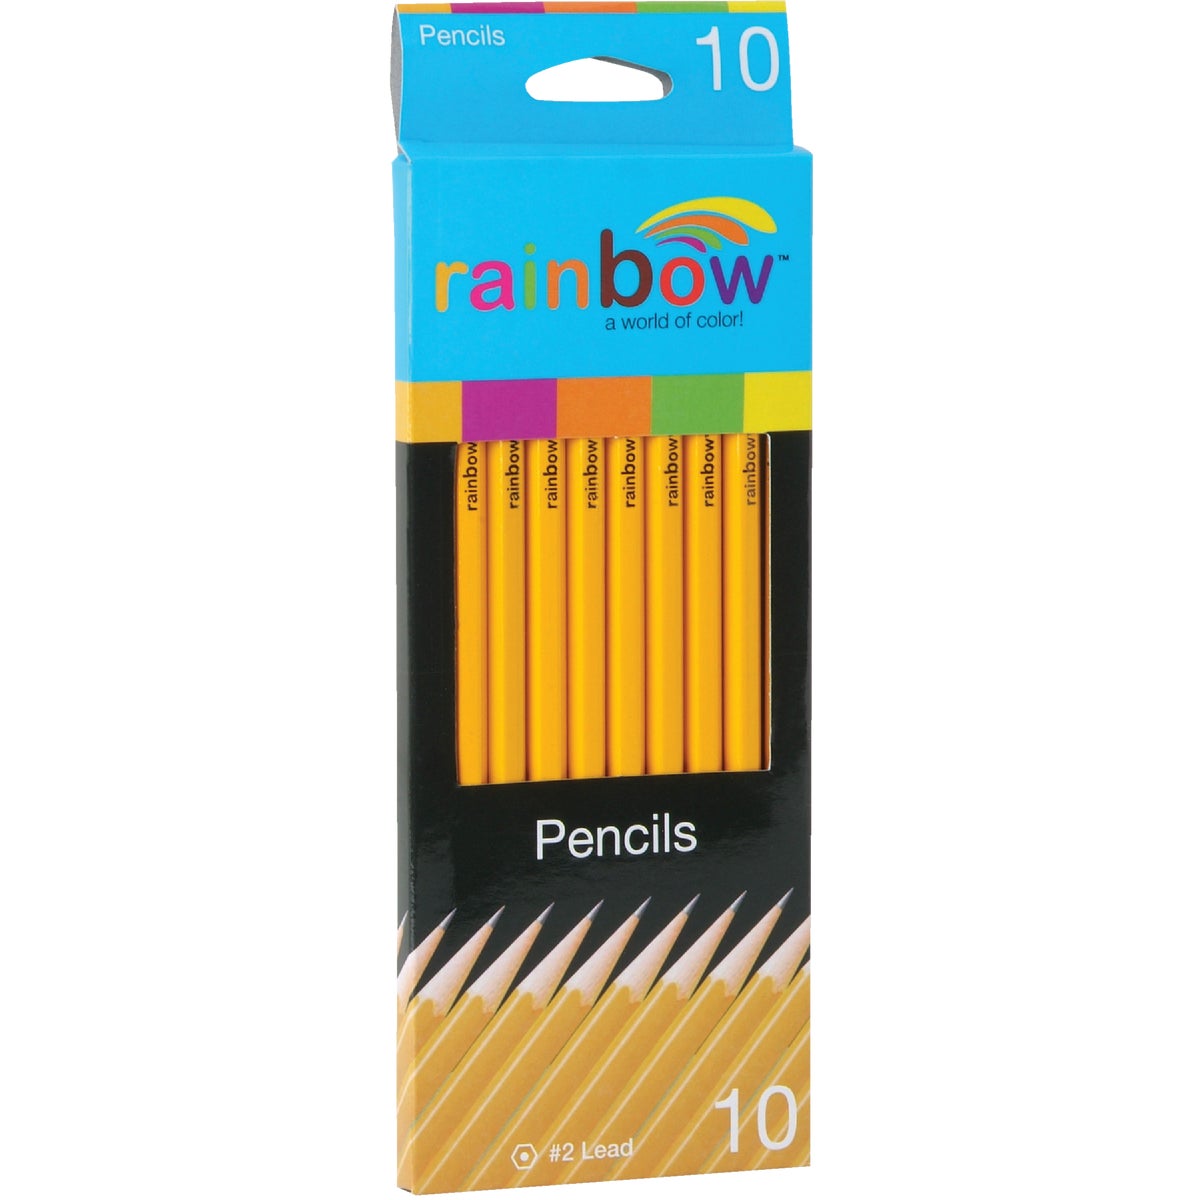 Item 970189, No. 2 lead core pencils with a yellow exterior and end cap pink eraser.